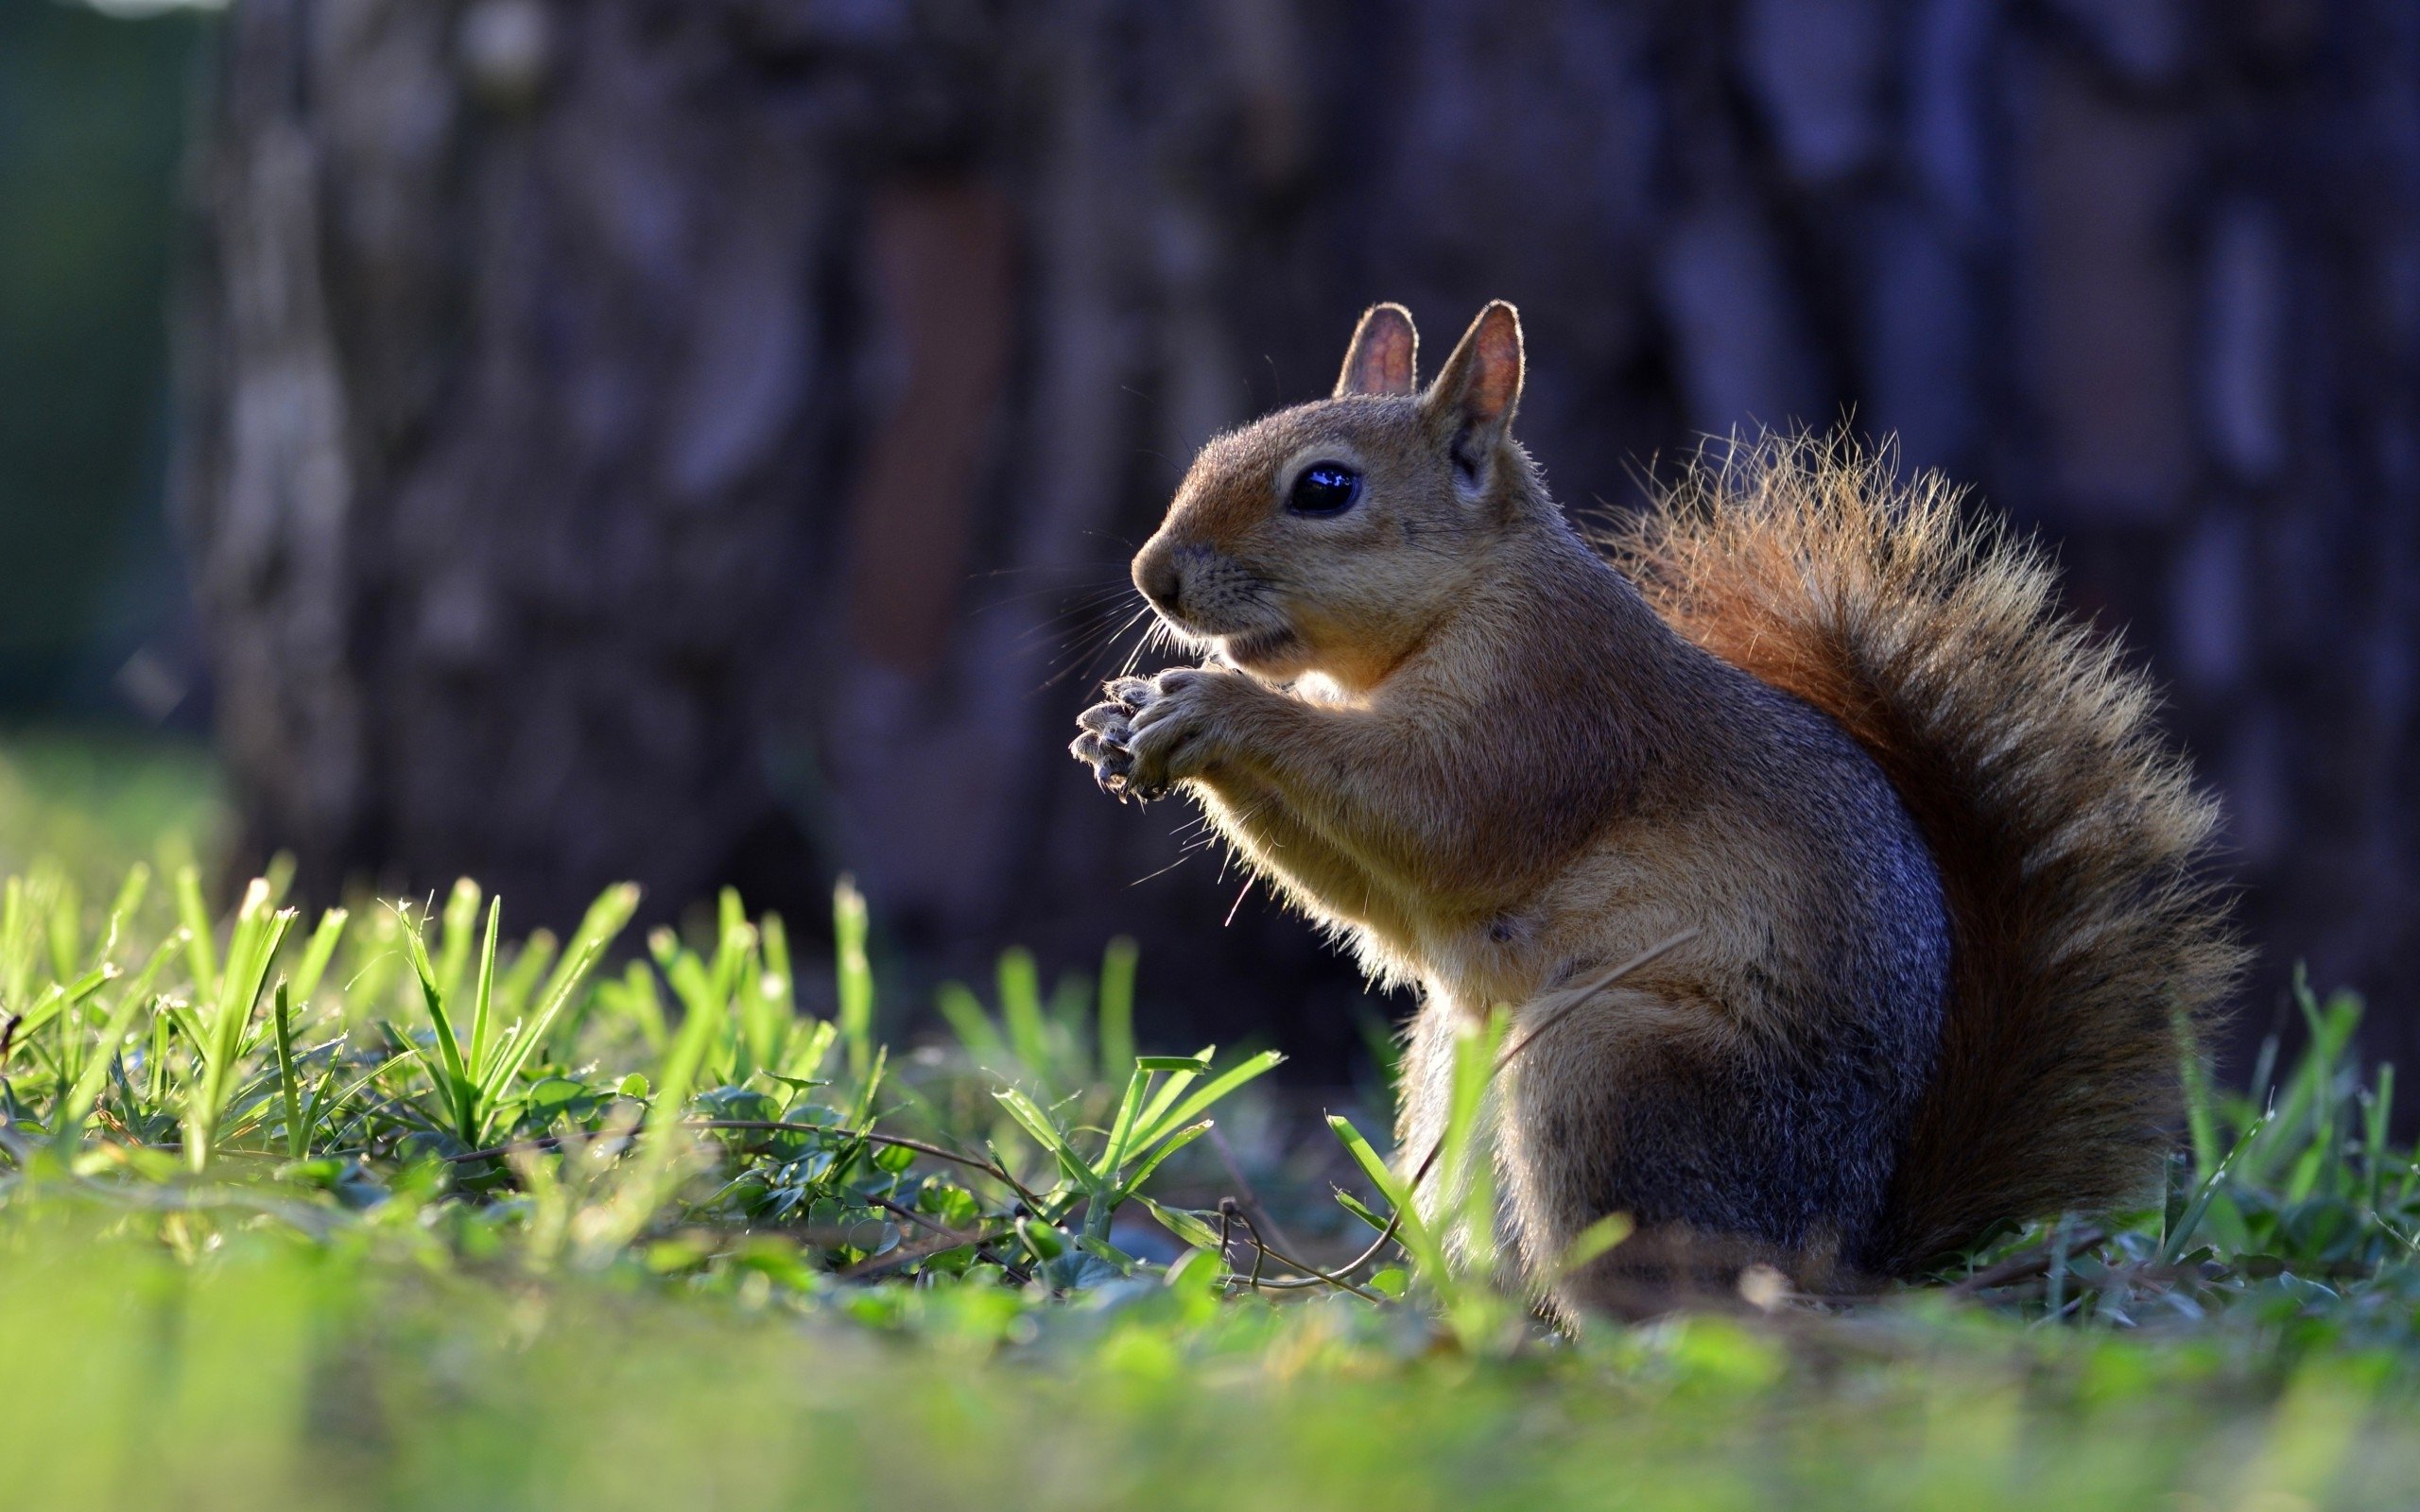 Animals Squirrel Hd Wallpapers For Mobile Phones And Laptops 2560x1600 :  